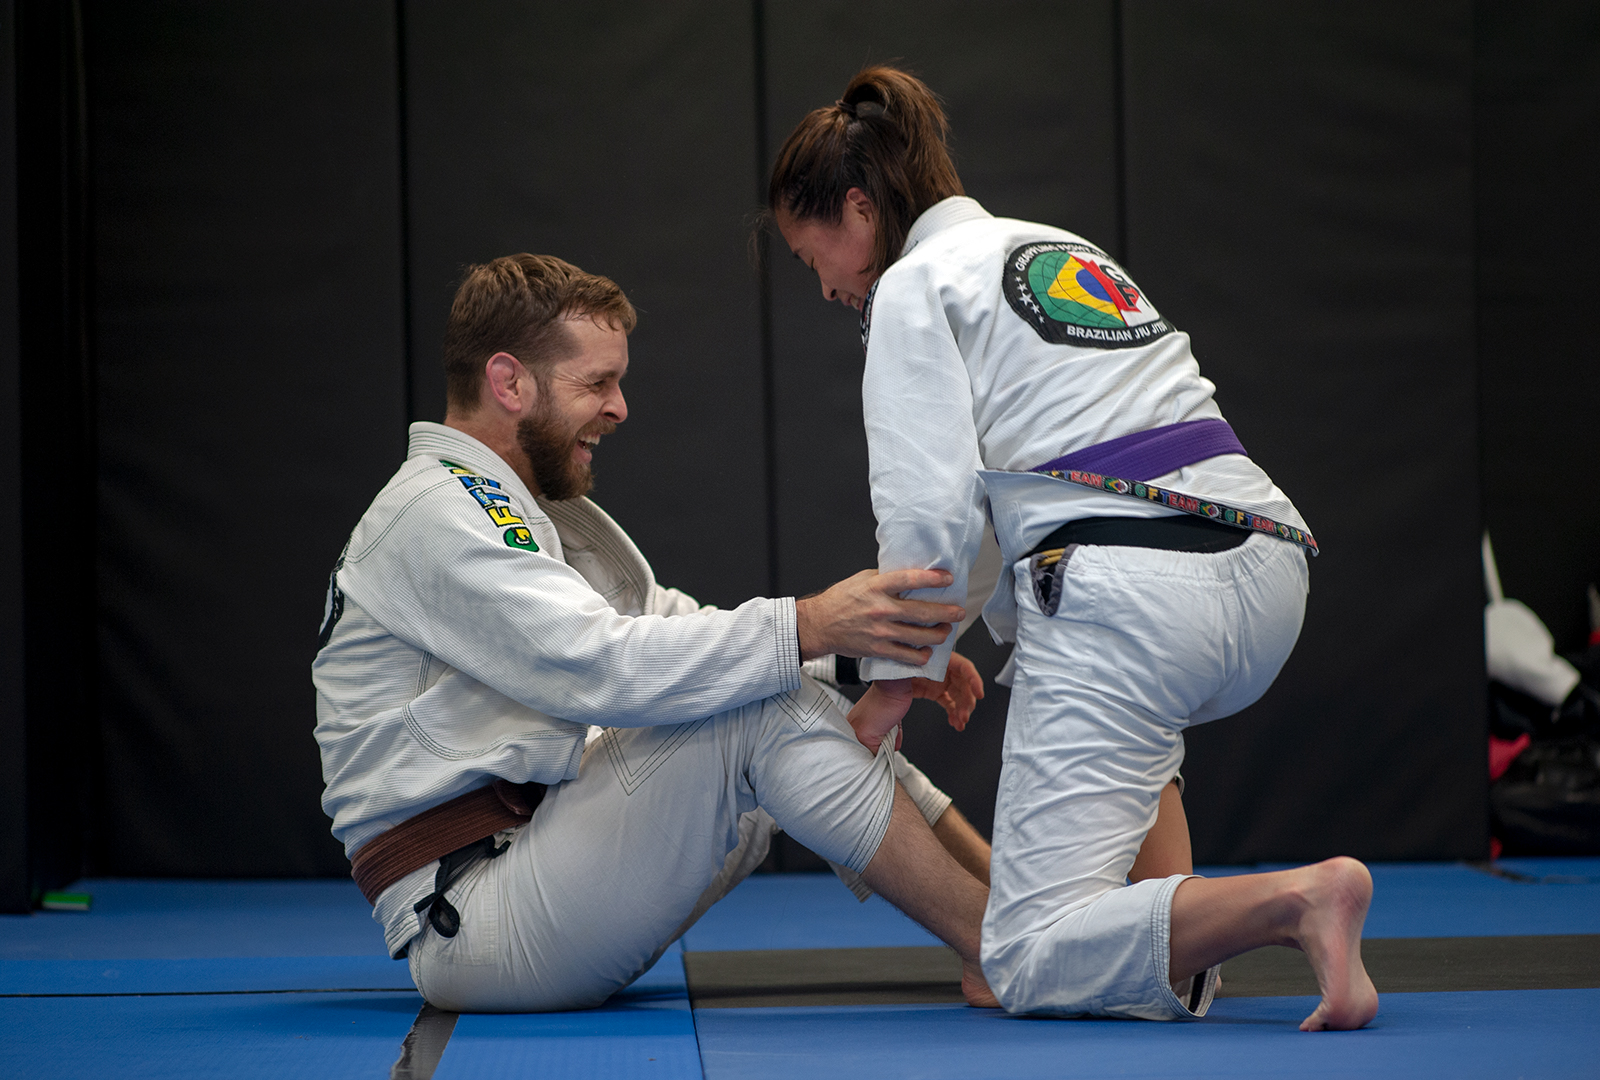 Adult Advanced BJJ at GFTeam Canada in Burnaby BC